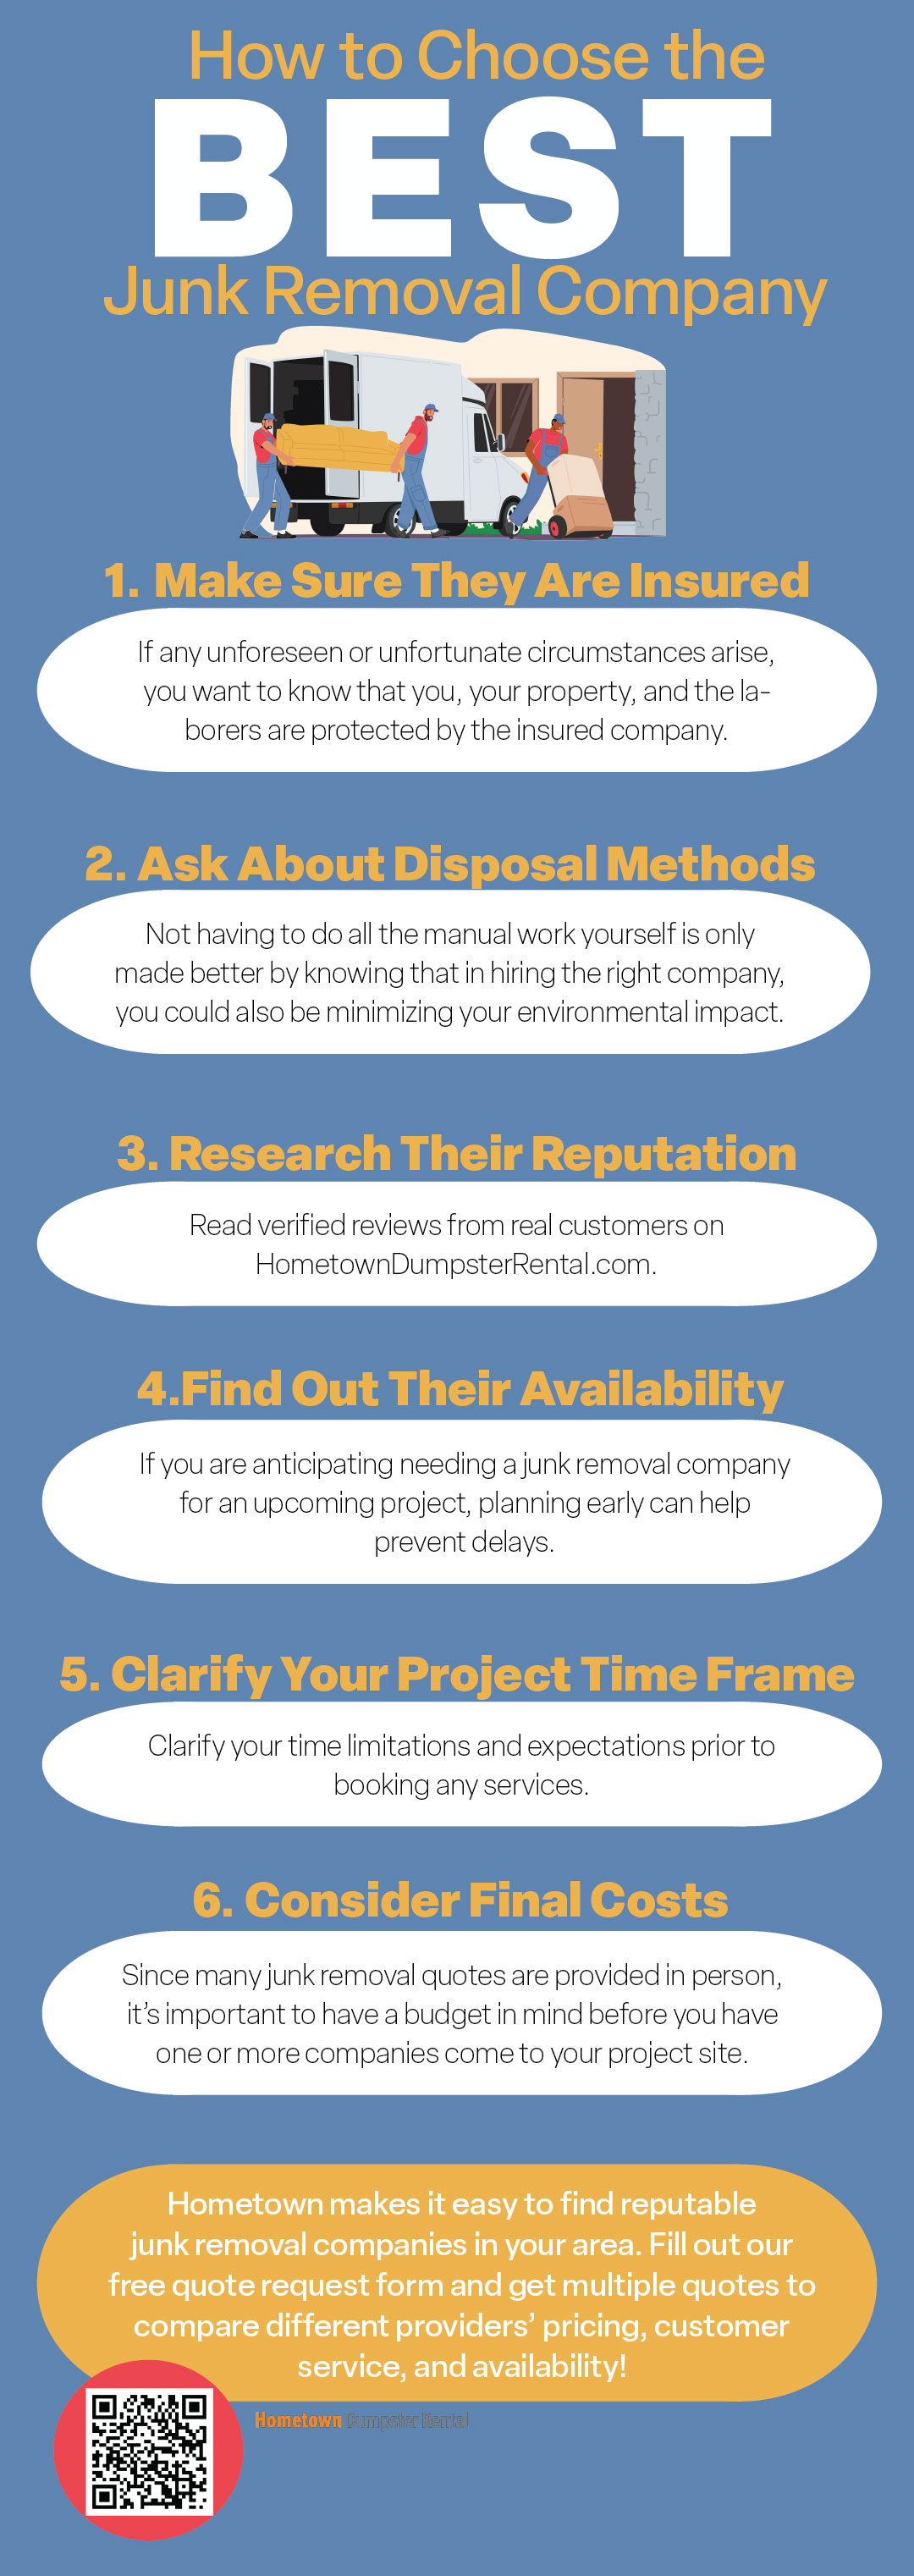 How to Choose the Best Junk Removal Company Infographic